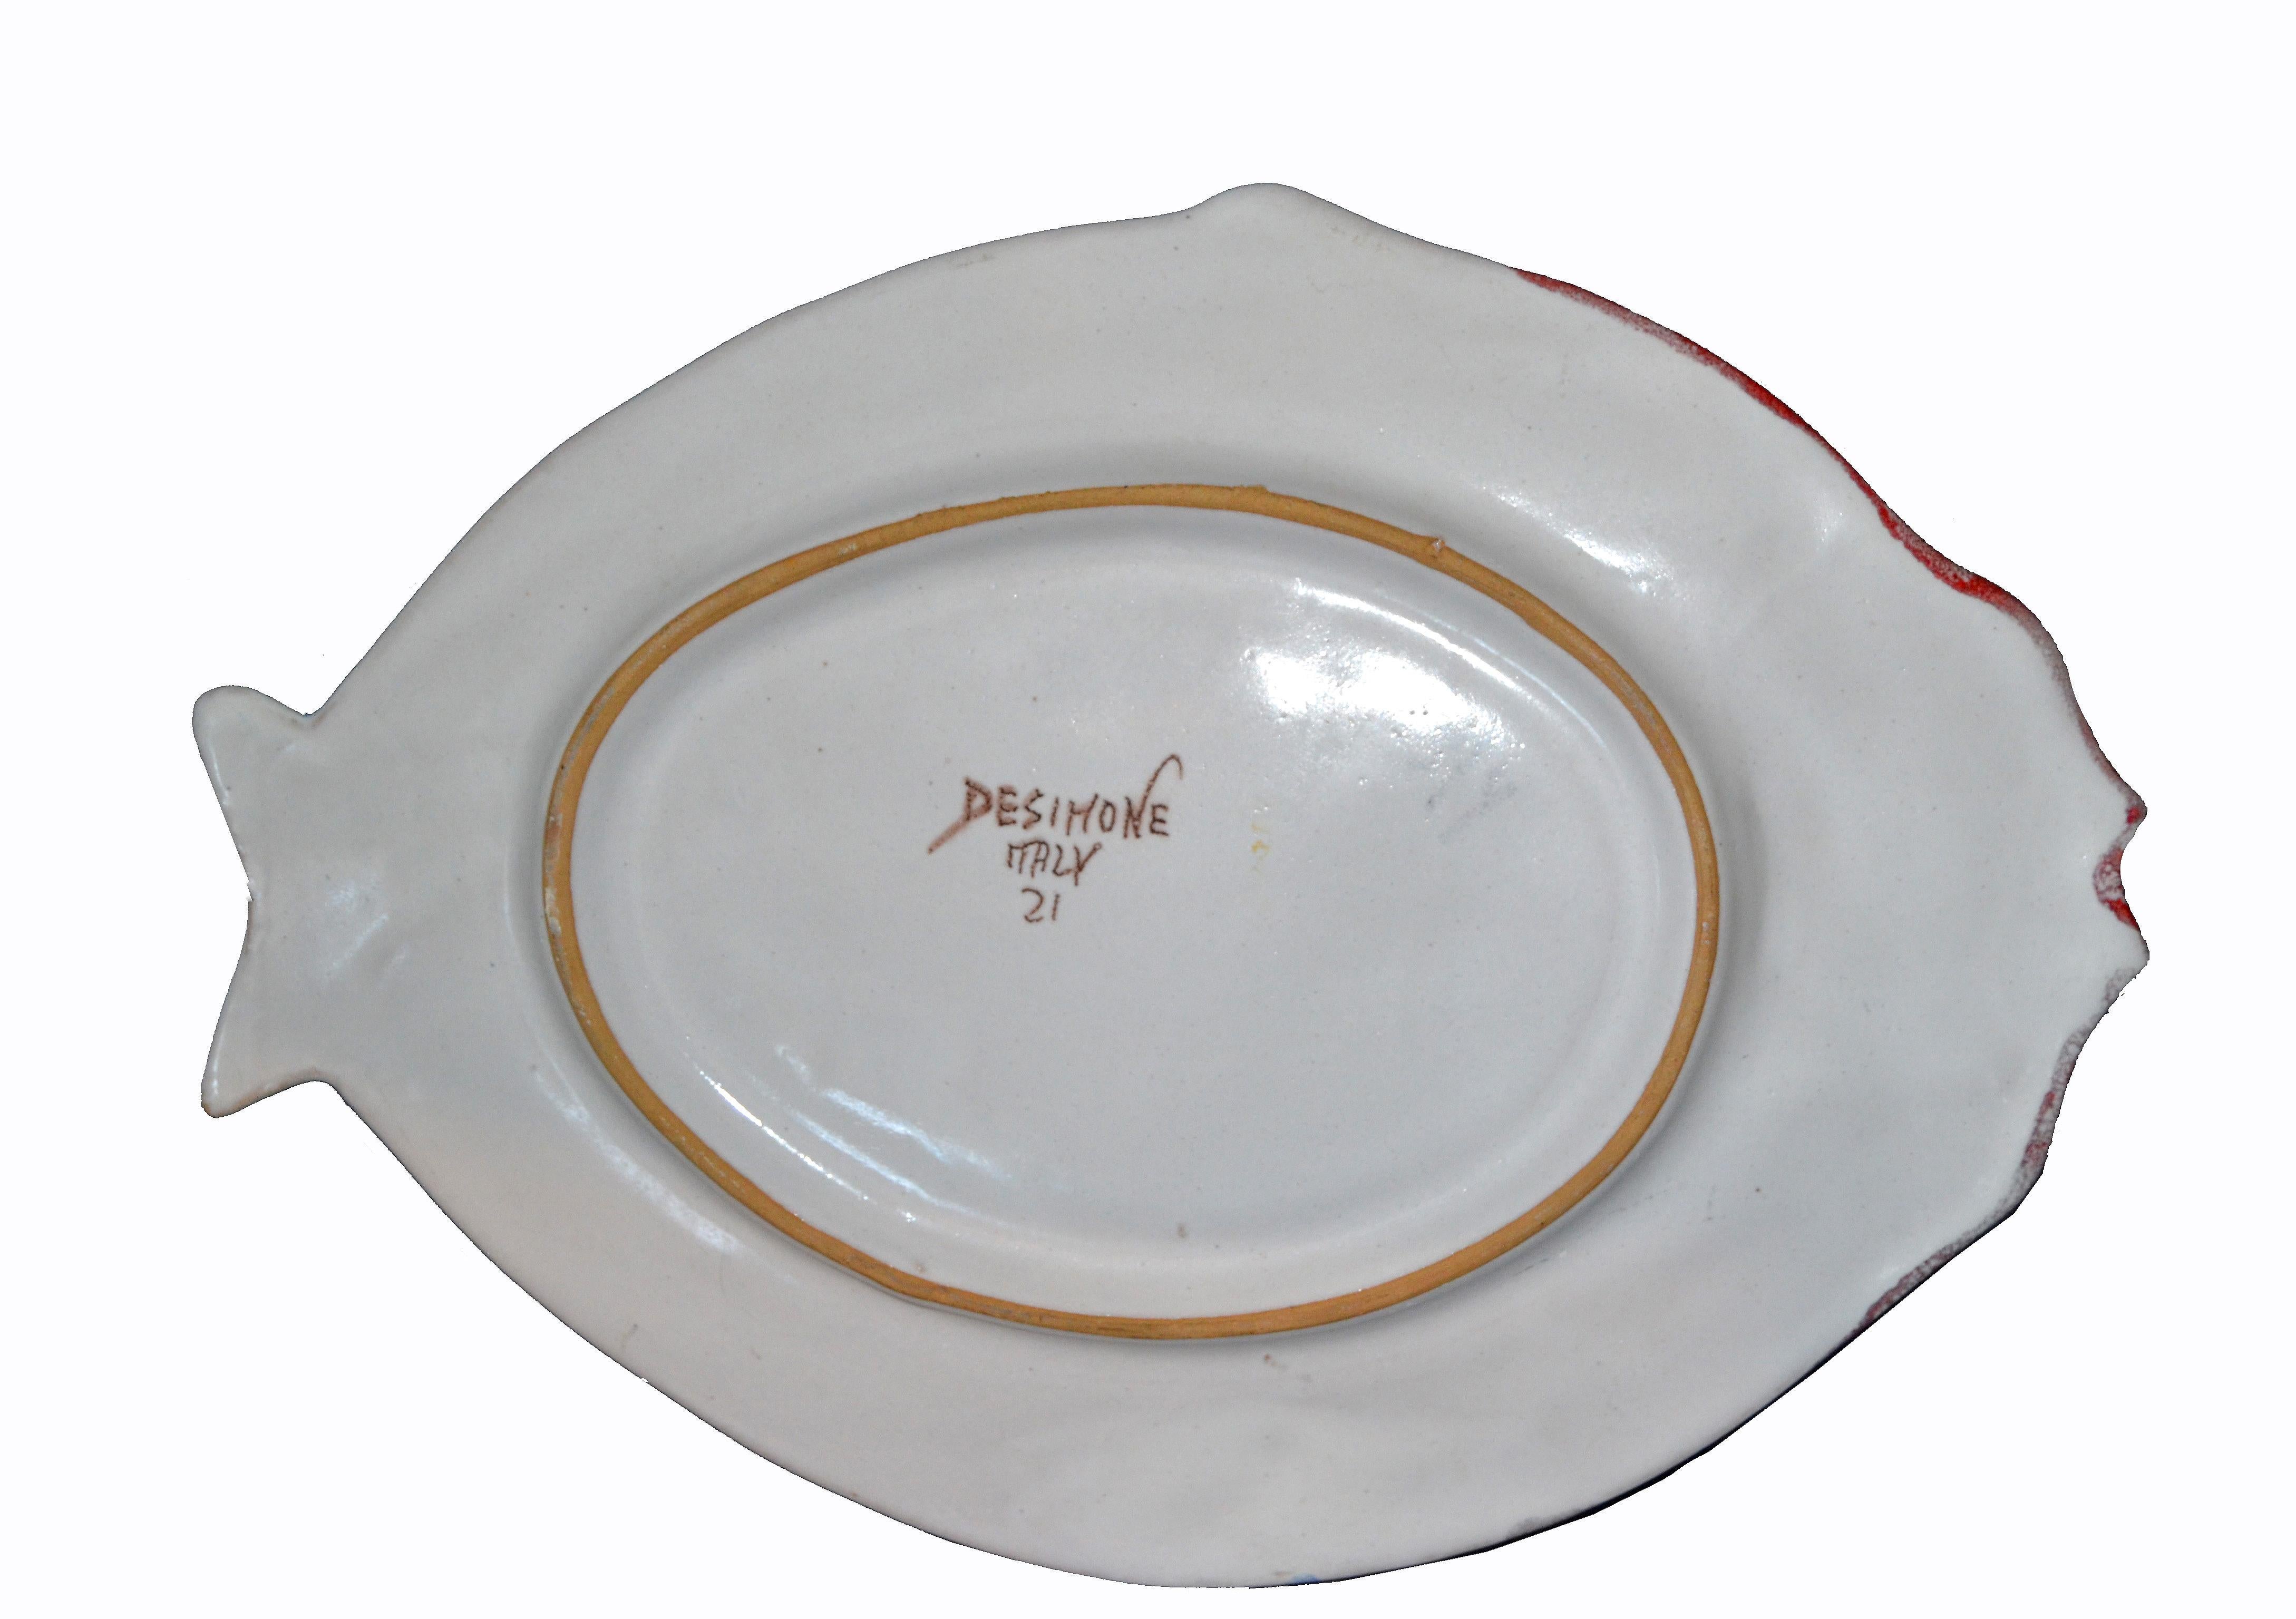 Italian Giovanni Desimone Hand Painted Pottery Fish Platter Serving Plate In Good Condition For Sale In Miami, FL